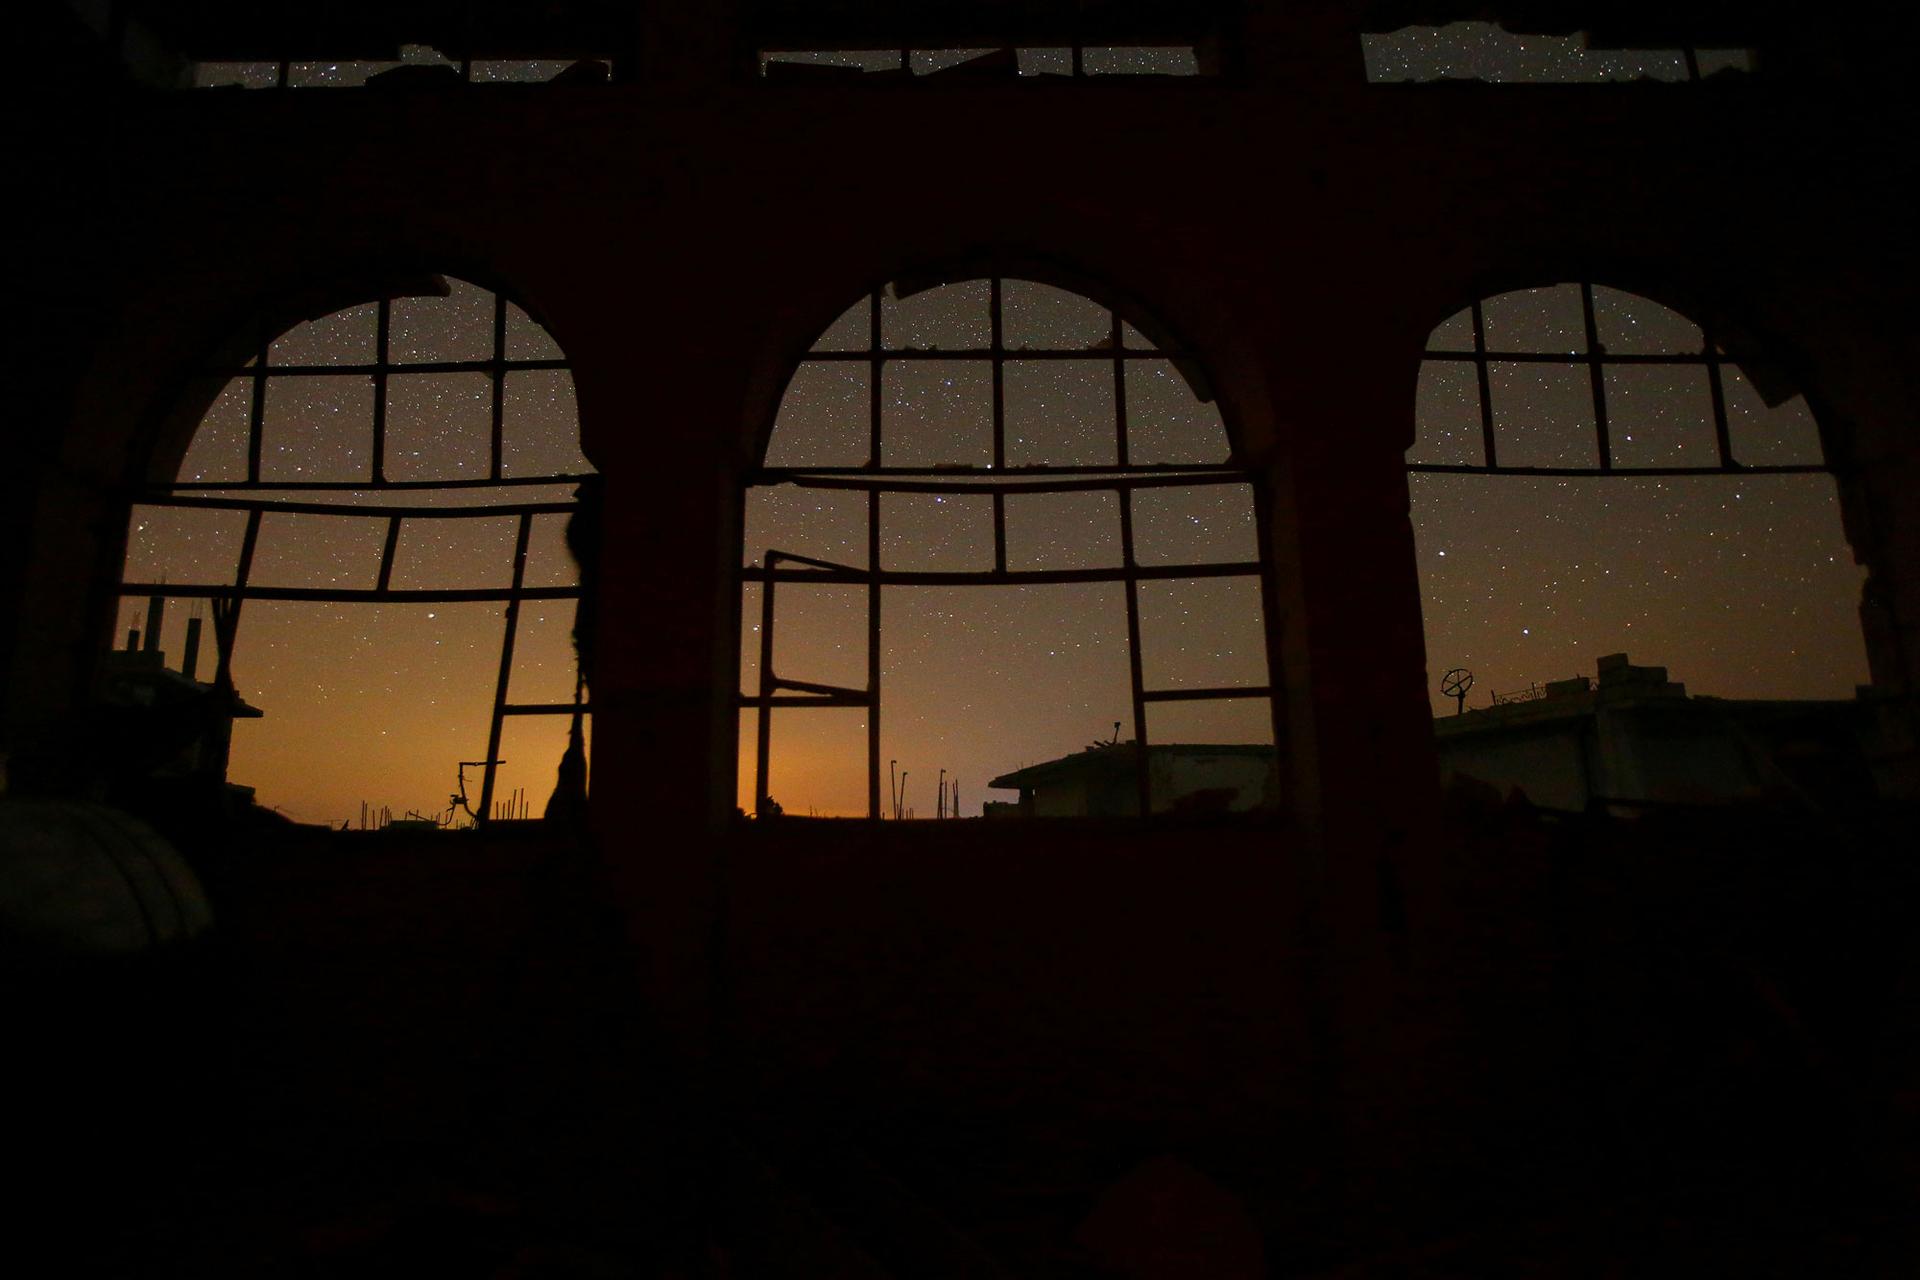 The night sky is seen through damaged windows in the rebel-controlled town of Binnish in Idlib province.